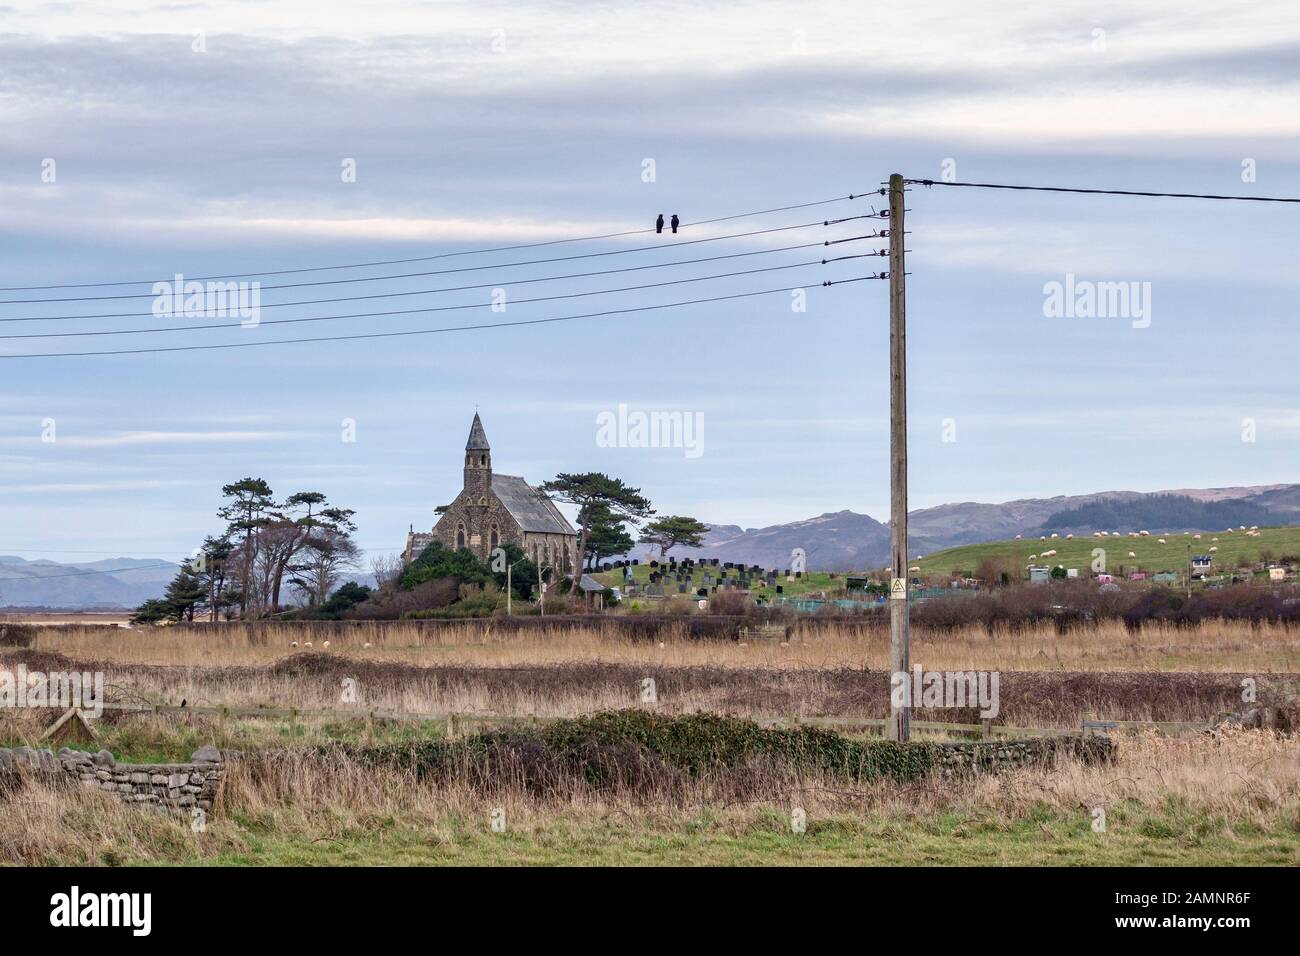 St Matthew's Church, Borth, Ceredigion, Wales, UK, built in 1874 to serve this small seaside resort town. Stock Photo